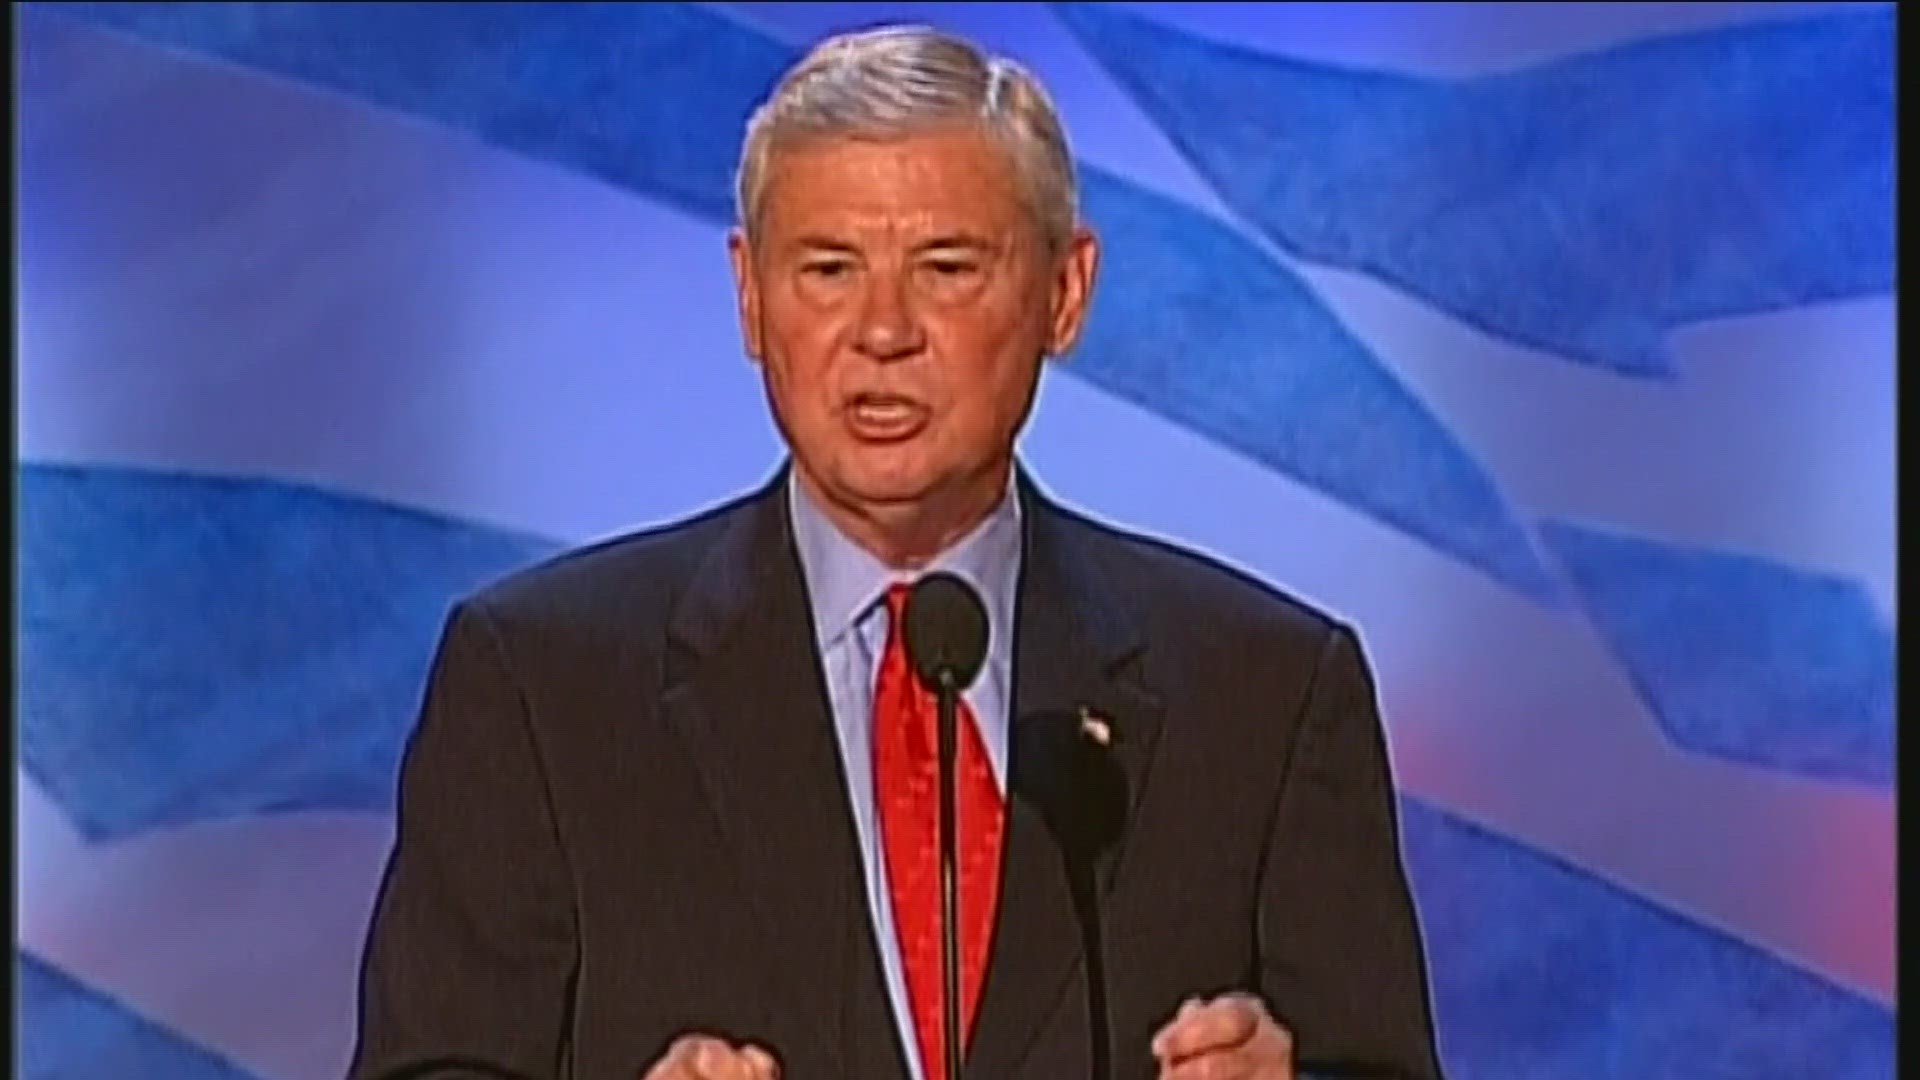 Former Florida Gov. and U.S. Sen. Bob Graham is remembered as a politician who genuinely loved people and encouraged them to get involved in civic affairs.